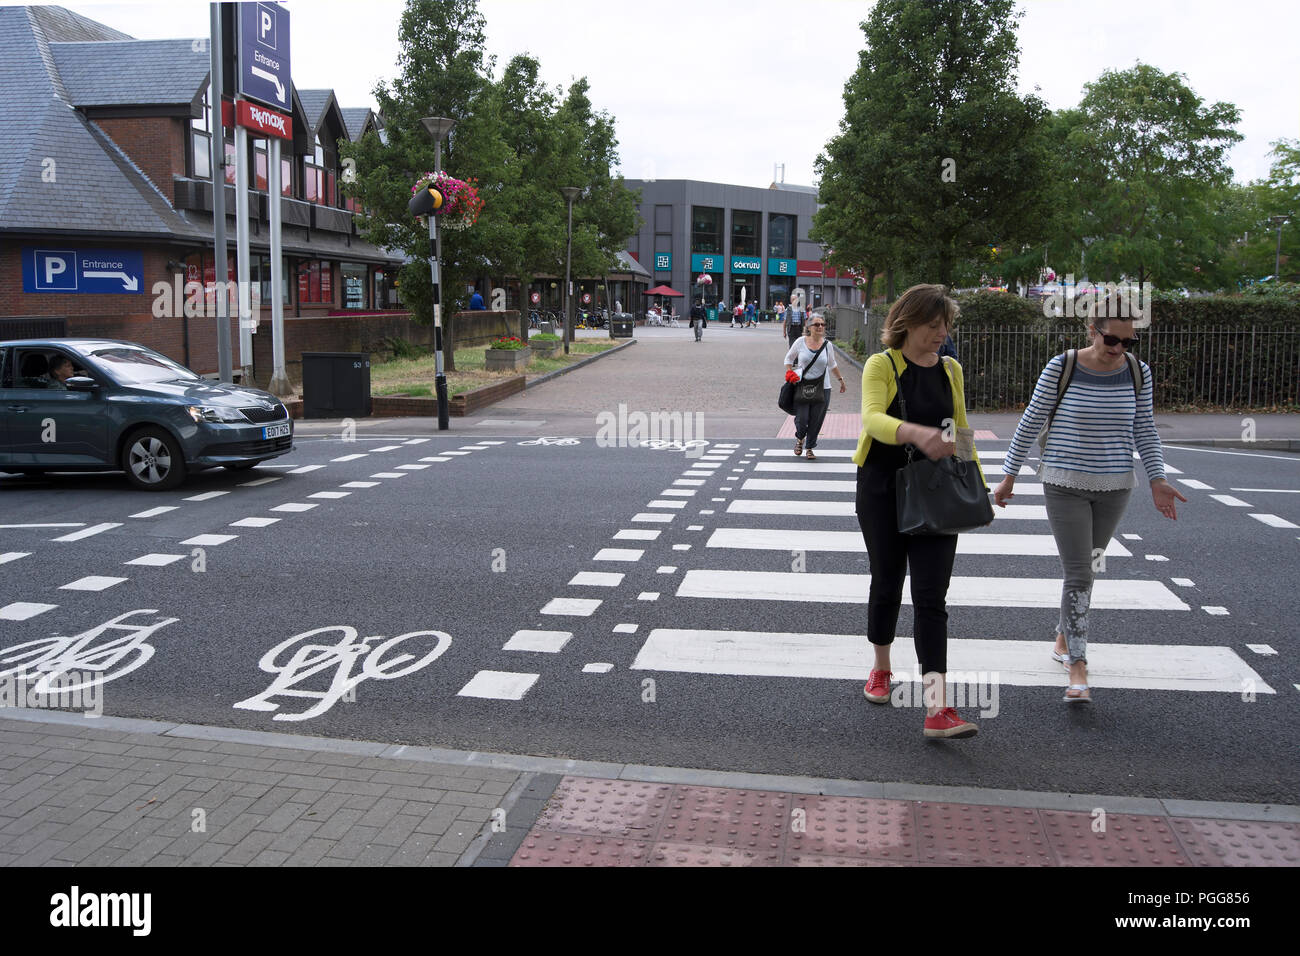 pedestrians cross a zebra crossing adjacent to a tiger crossing, intended for cyclists, in walthamstow, london, england Stock Photo